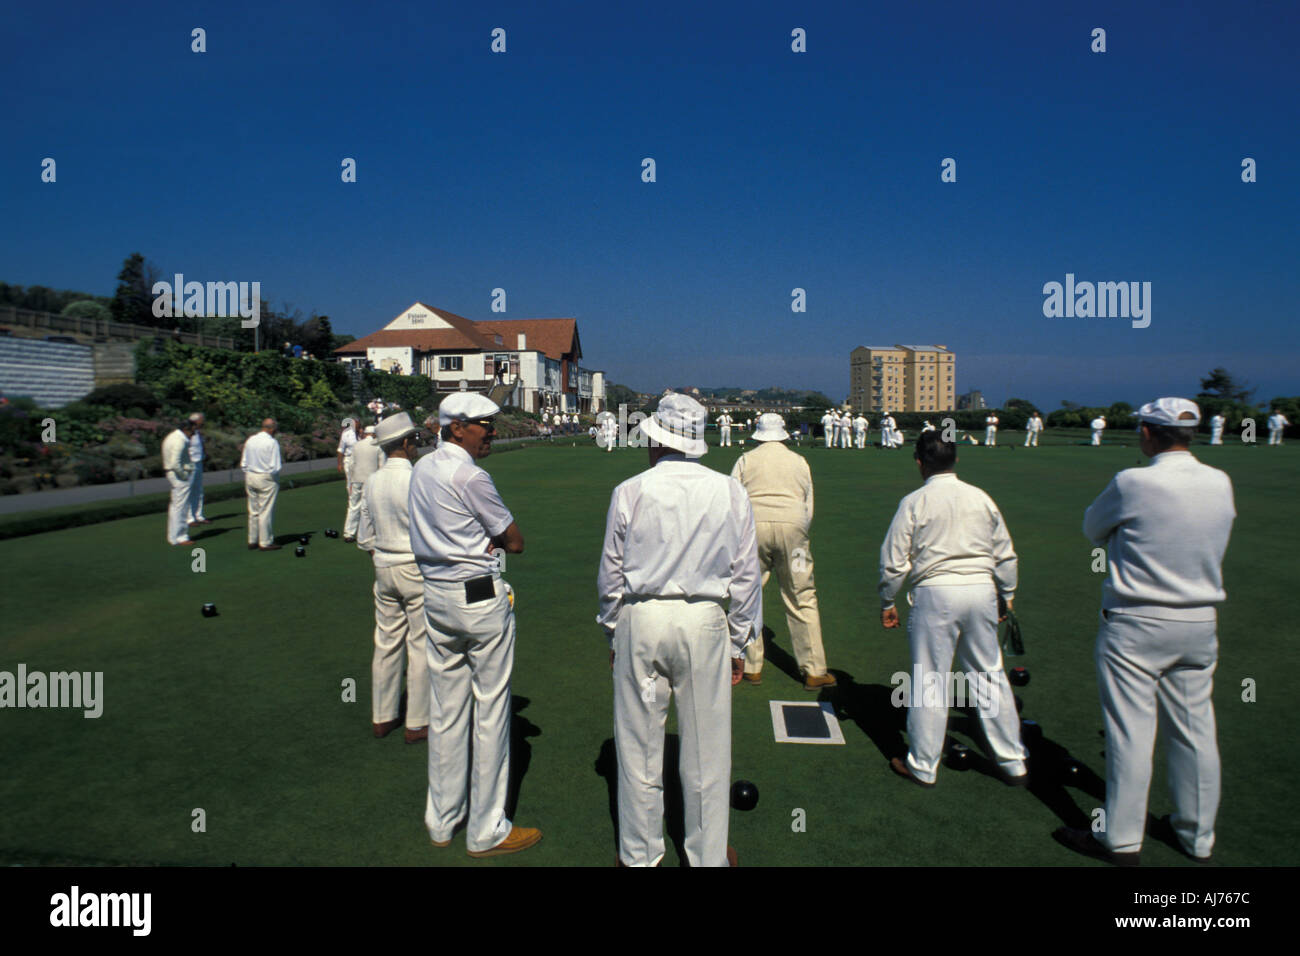 Players at the White Rock Gardens bowls club, Hastings, East Sussex, England, Great Britain, UK Stock Photo